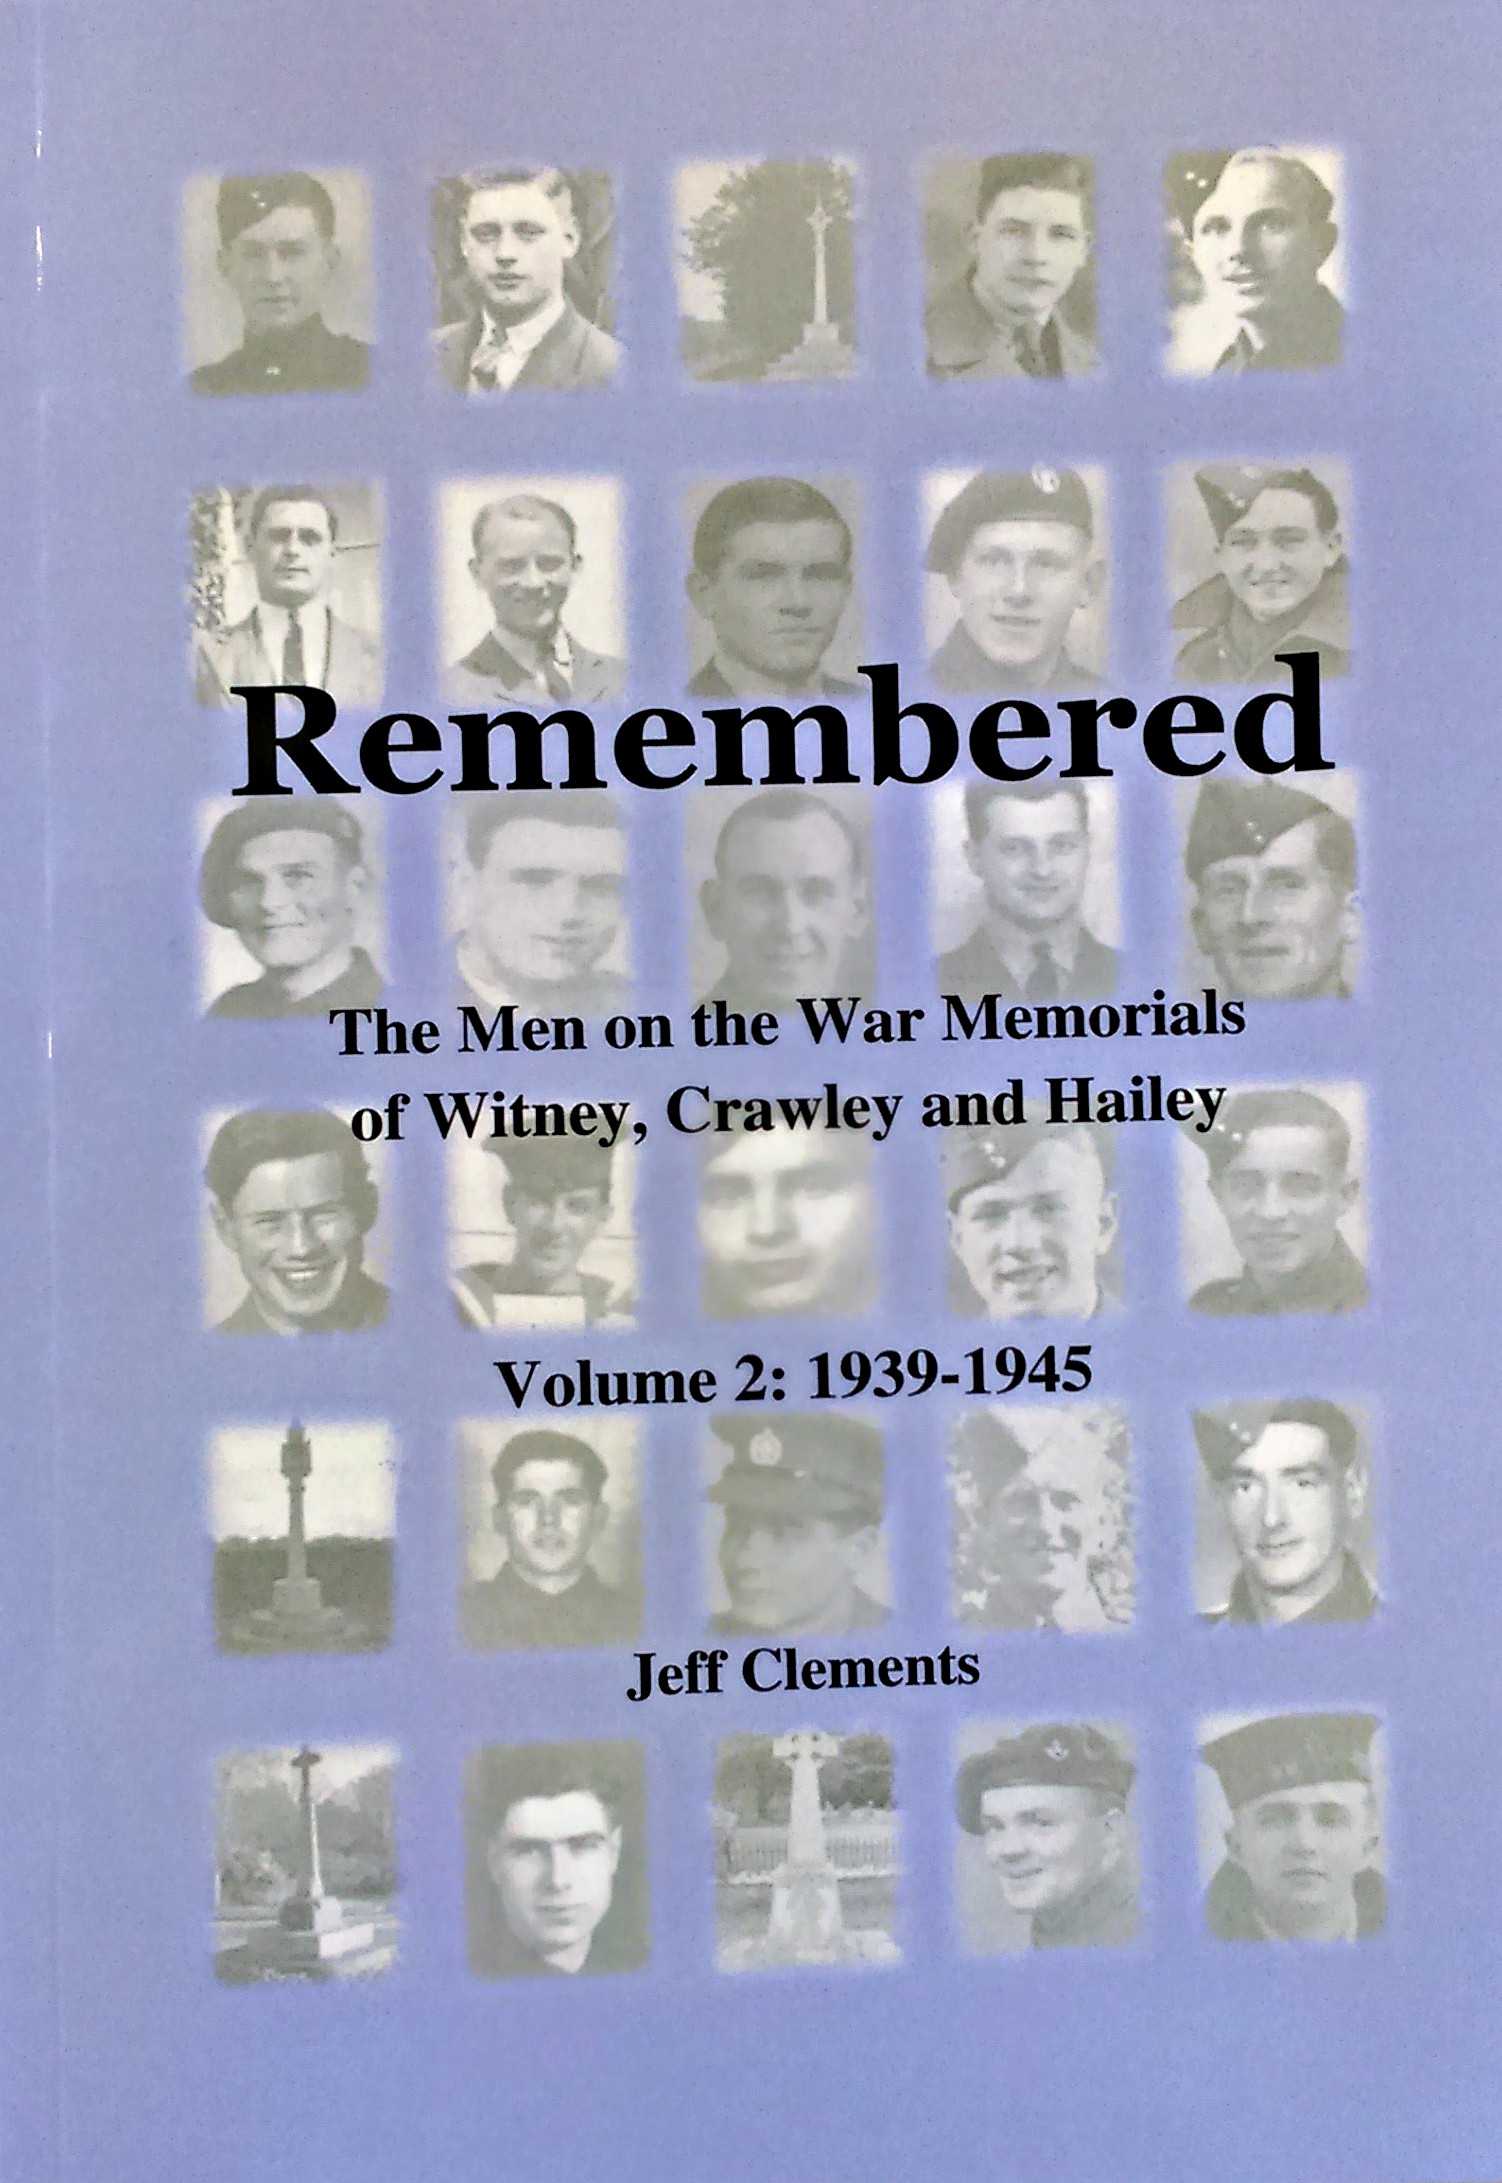 Remembered: The Men on the War Memorials of Witney, Crawley and Hailey. Volume 2: 1939-1945.